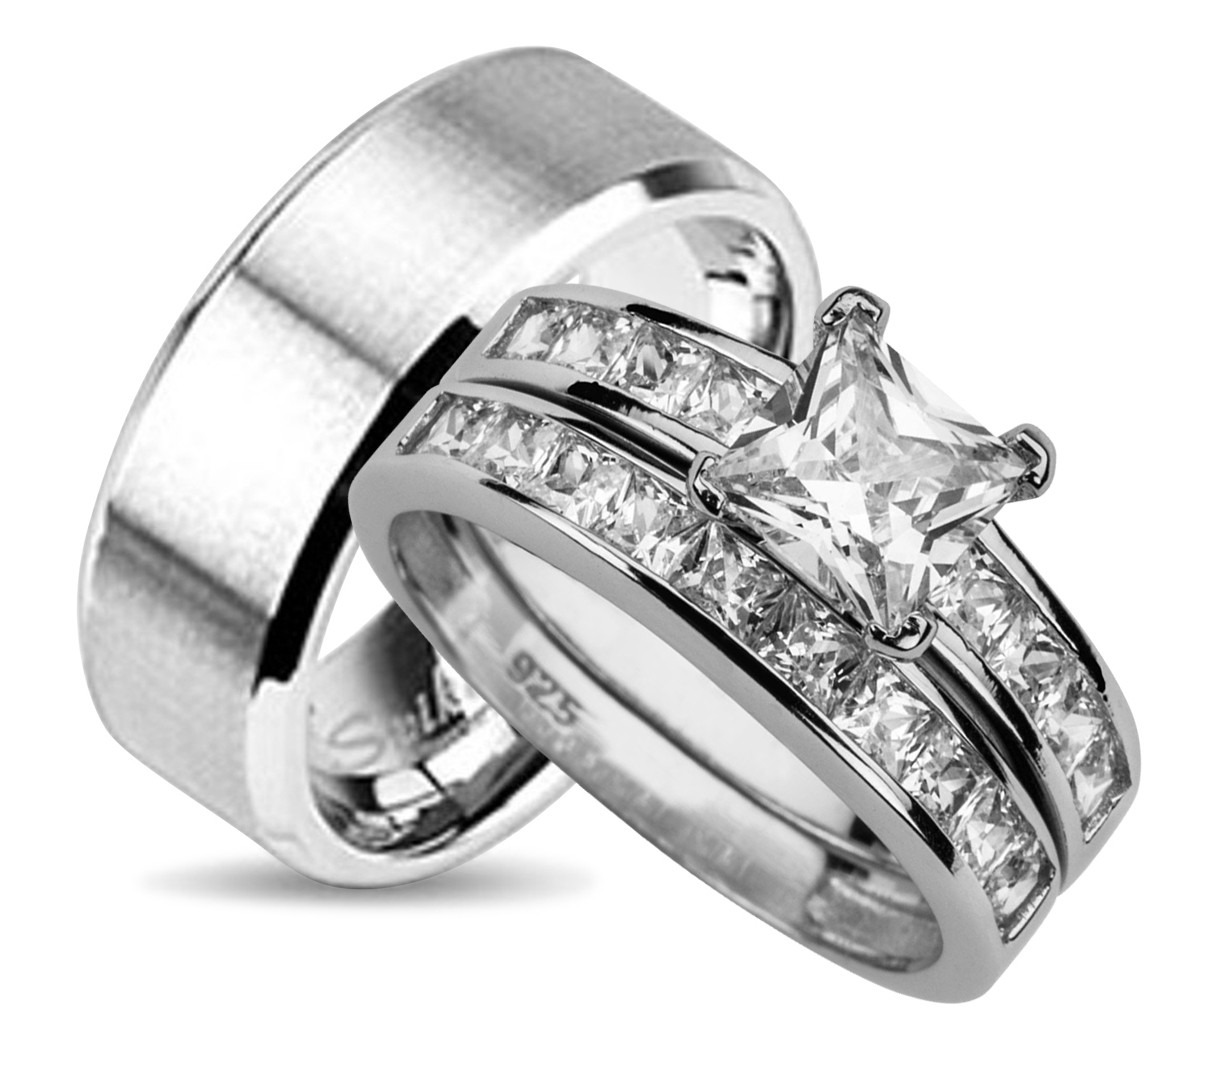 Matching Wedding Ring Sets His And Hers
 LaRaso & Co His and Hers Wedding Ring Set Matching